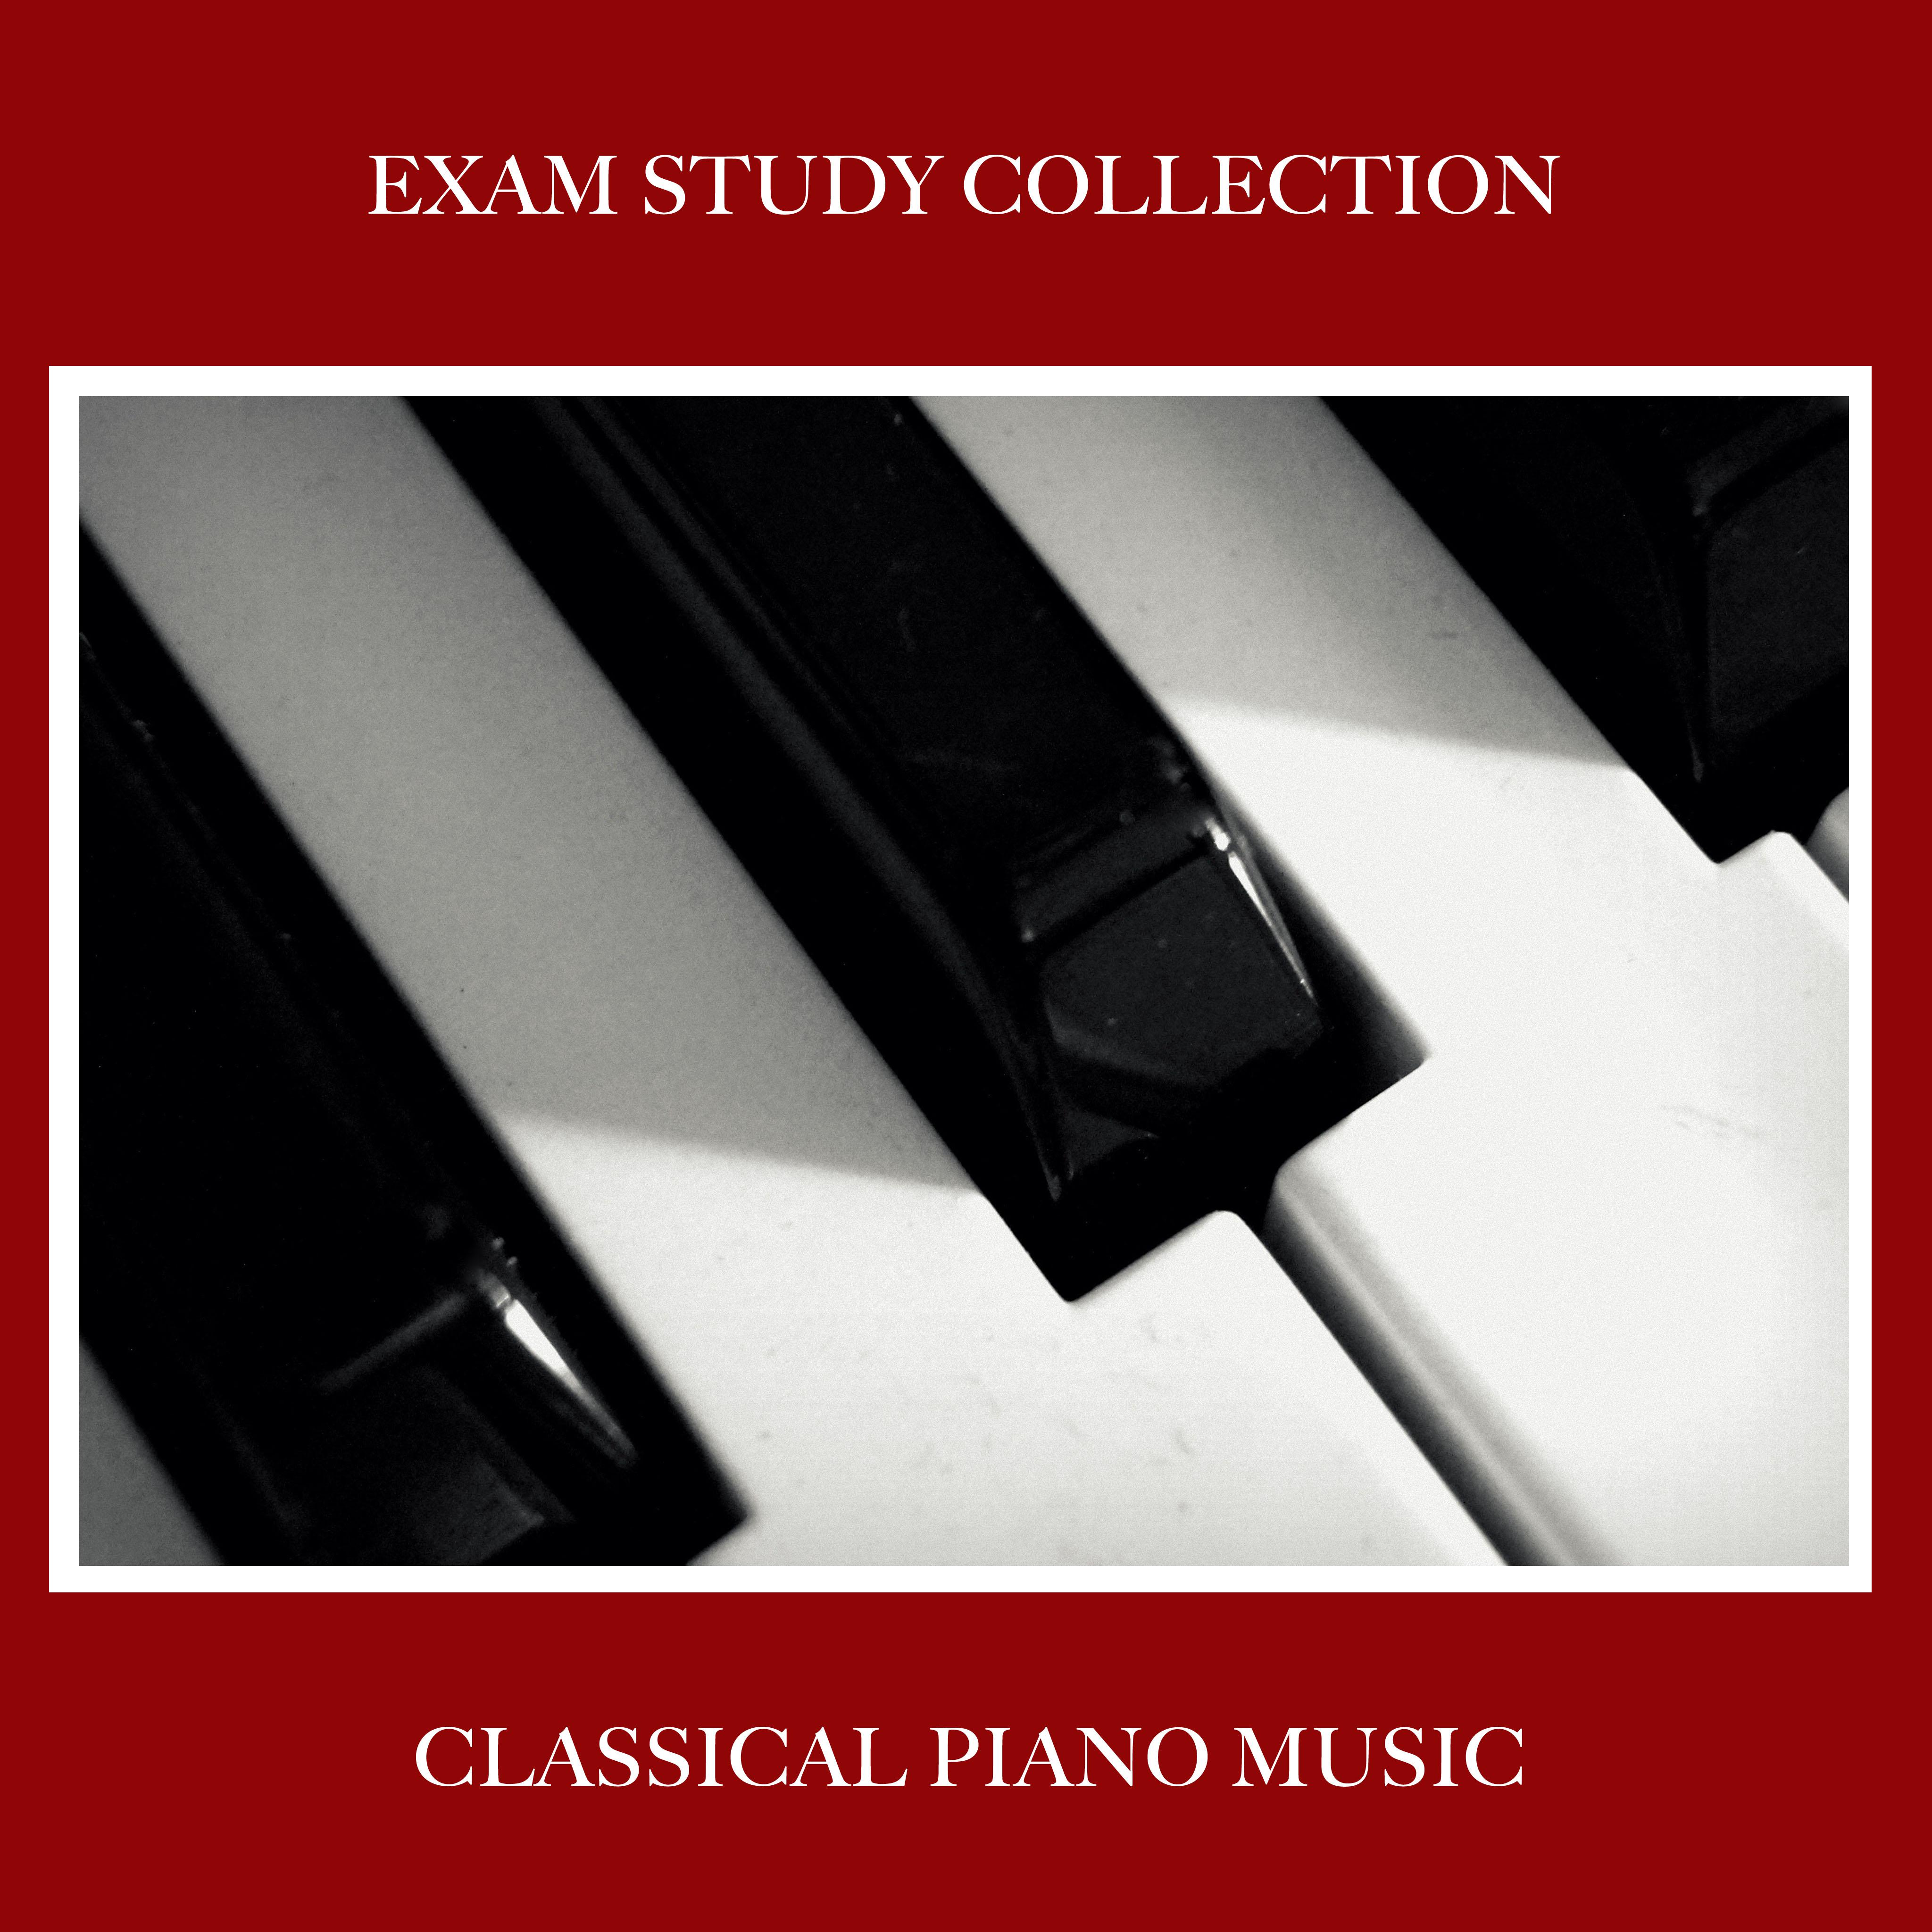 2018 An Exam Study Collection: Classical Piano Music